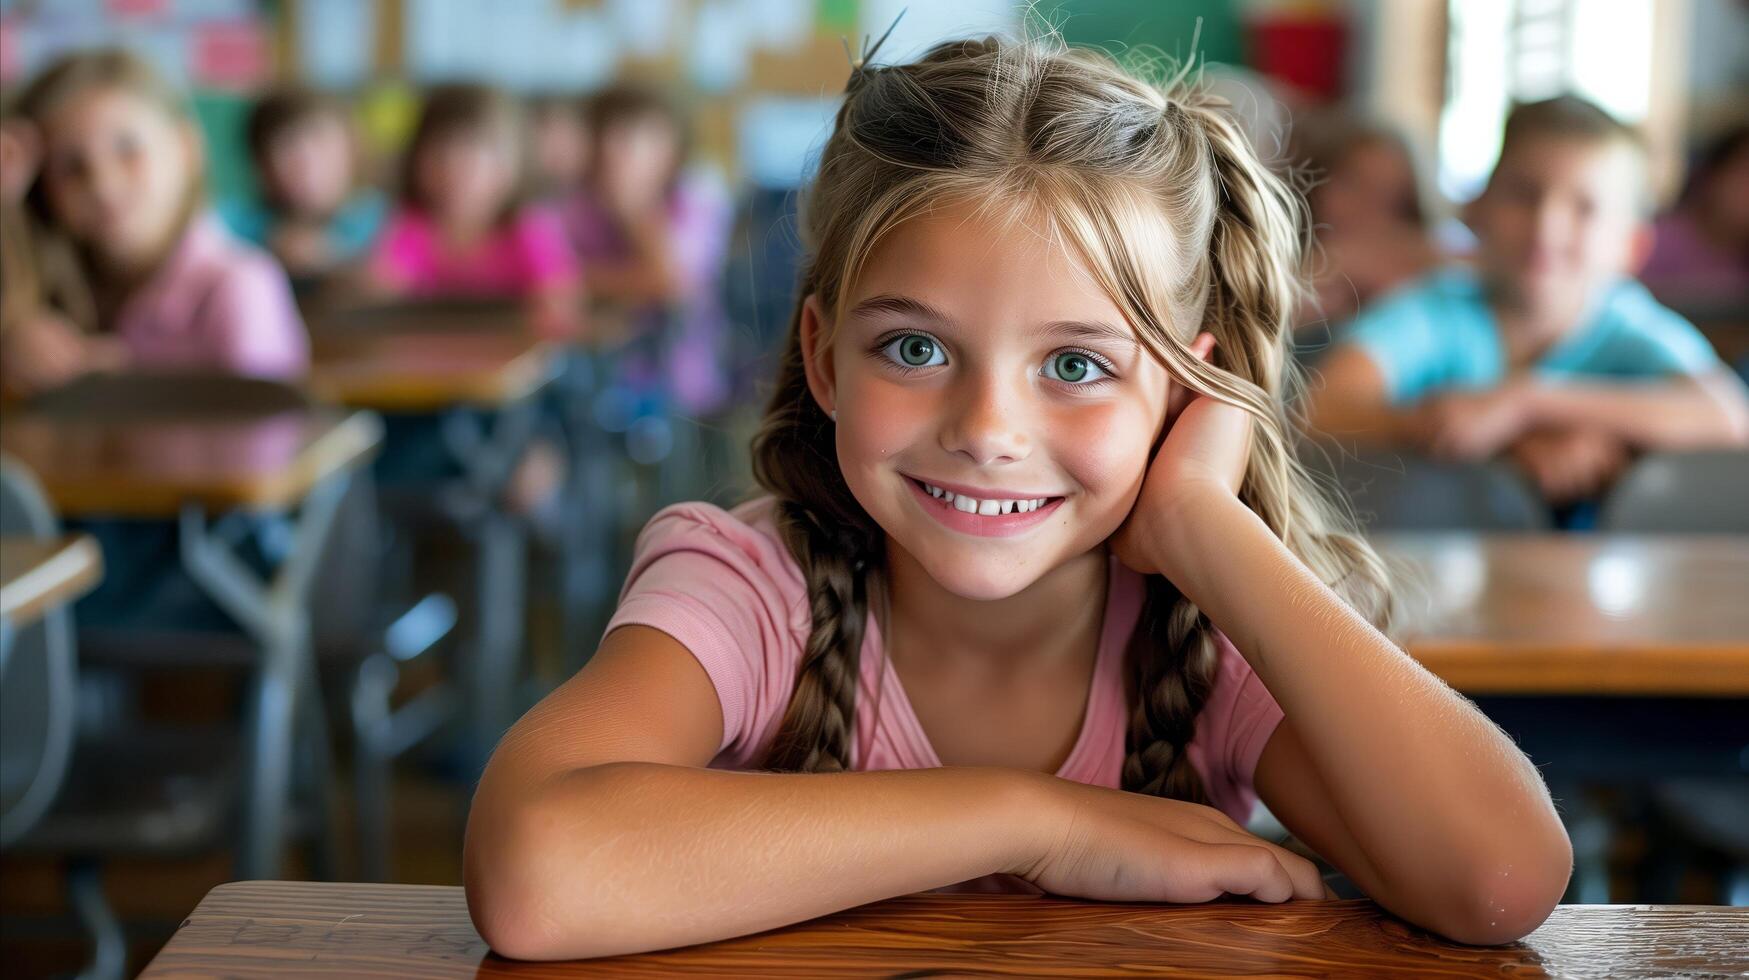 Smiling Girl in Classroom With Other Students in Background photo